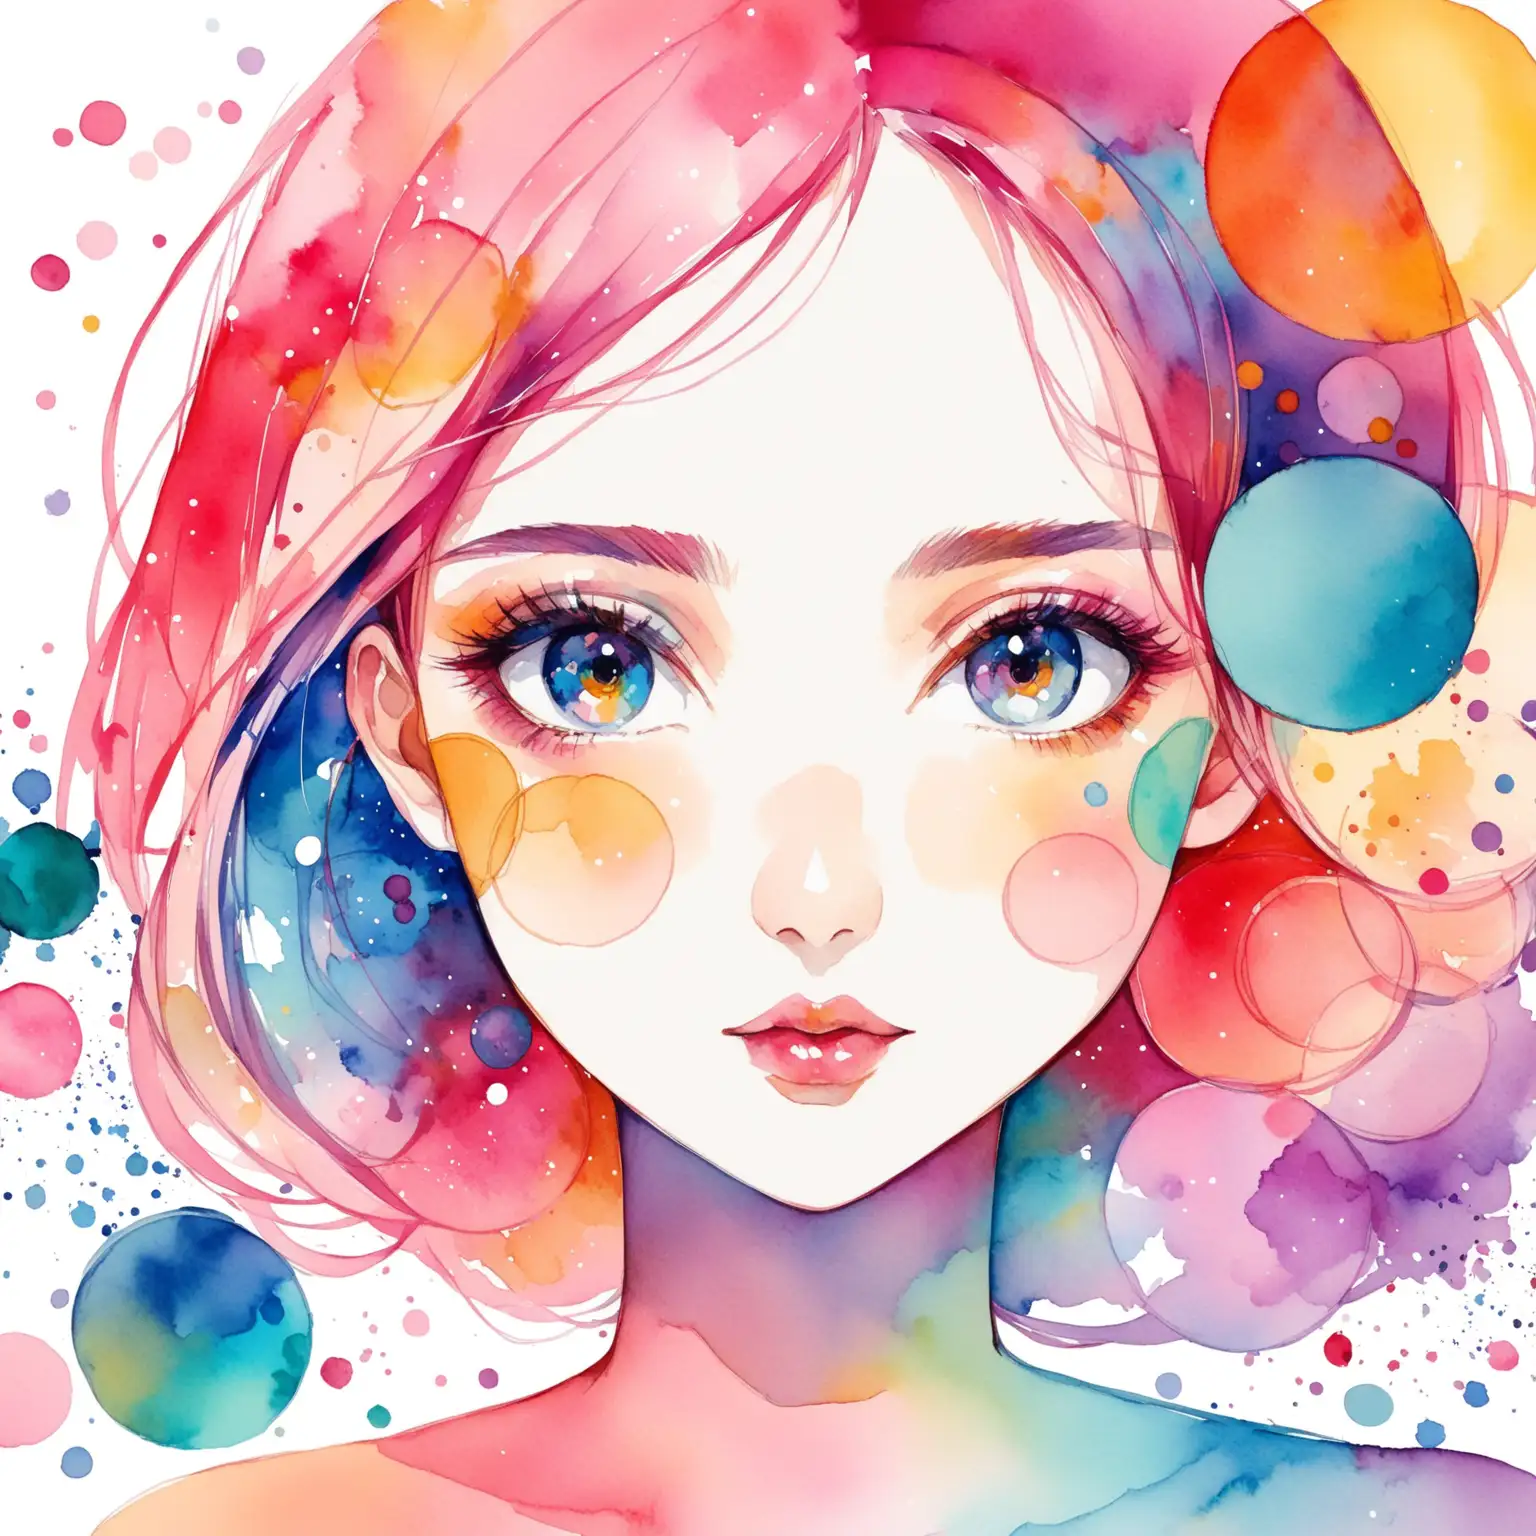 
draw me a backround for beautybox with anti-age theme, I want it to be water colours, abstract, but I want there to be a woman's face, colourful circles and other geometric shapes